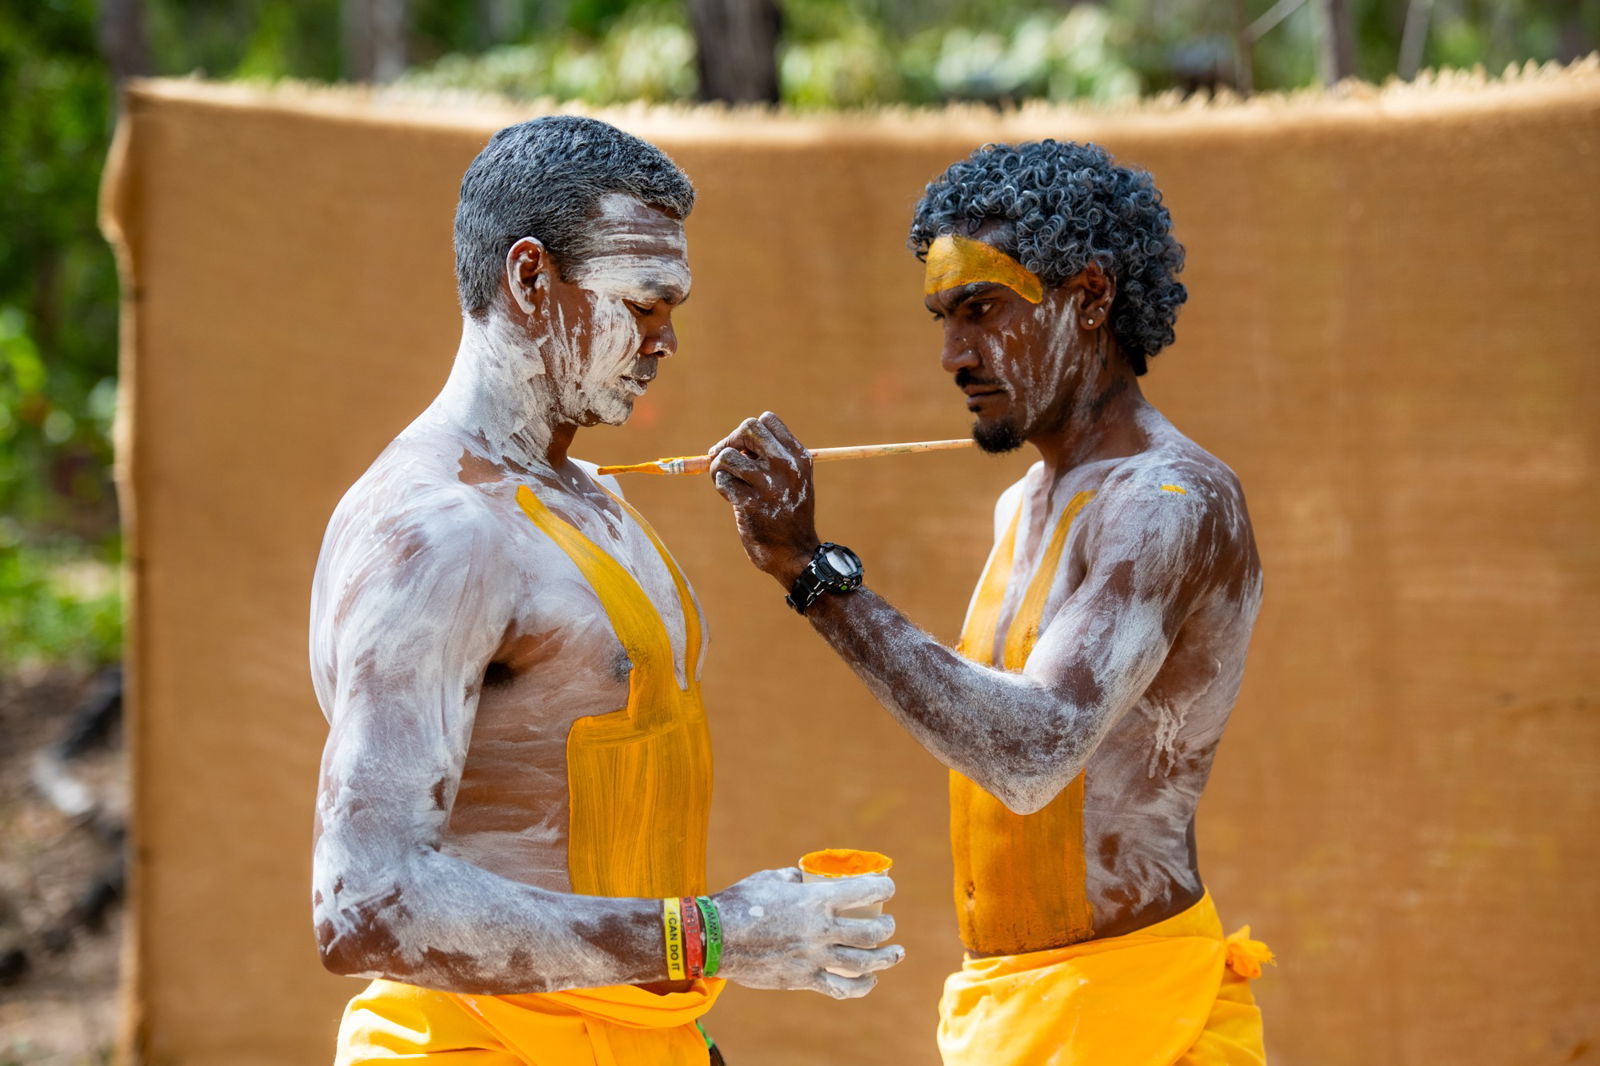 Two men in white and yellow body paint.